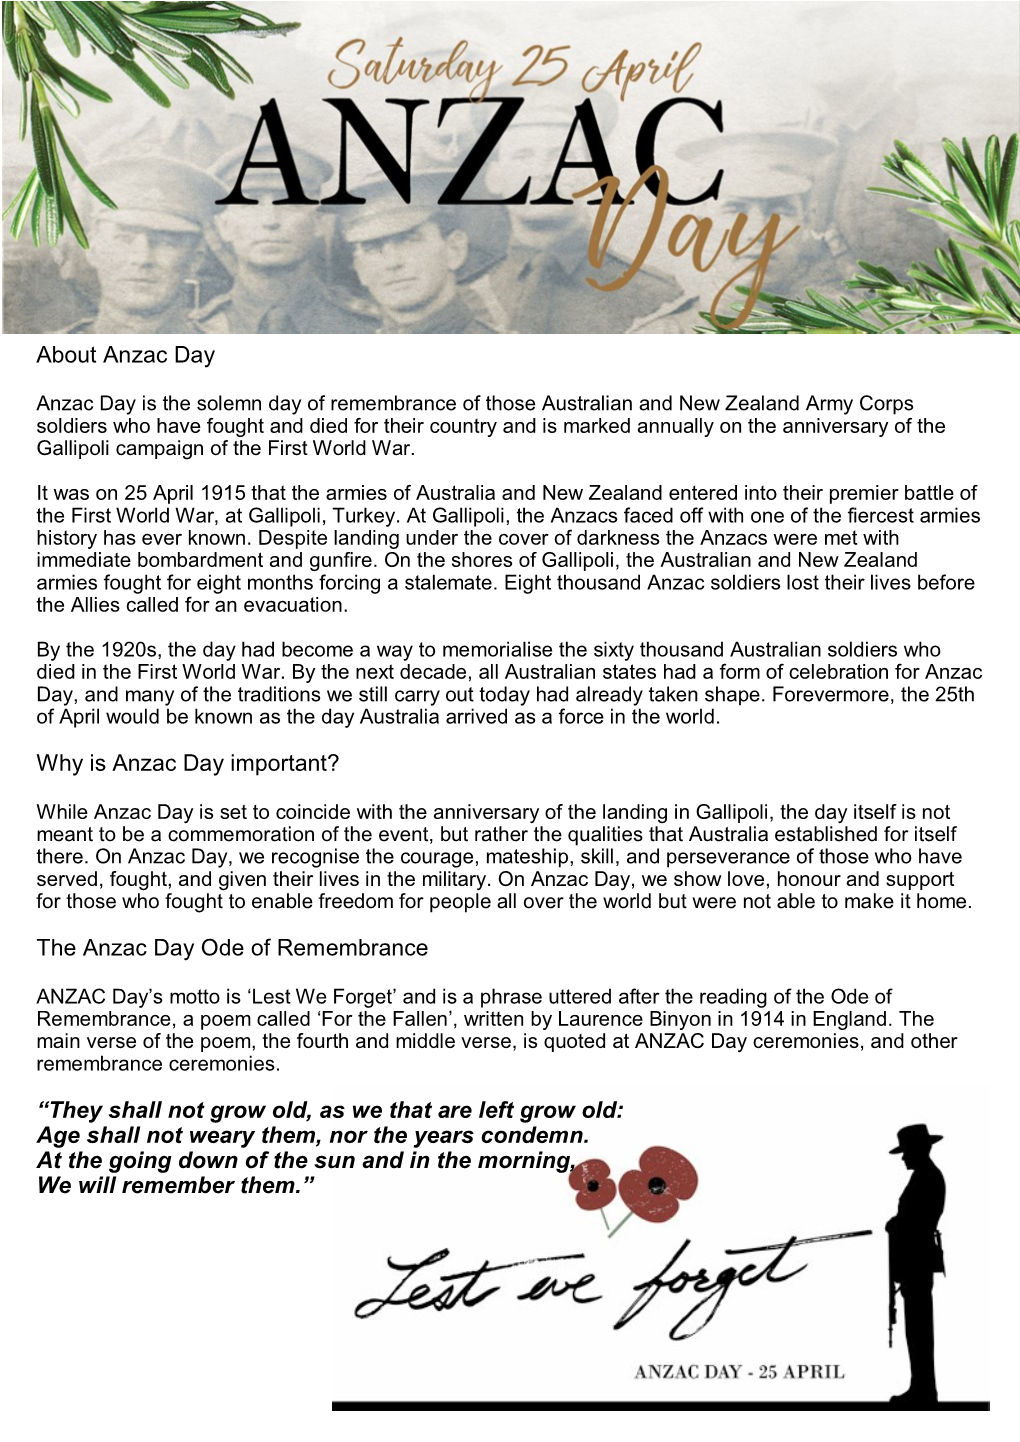 The Anzac Day Ode of Remembrance “They Shall Not Grow Old, As We That